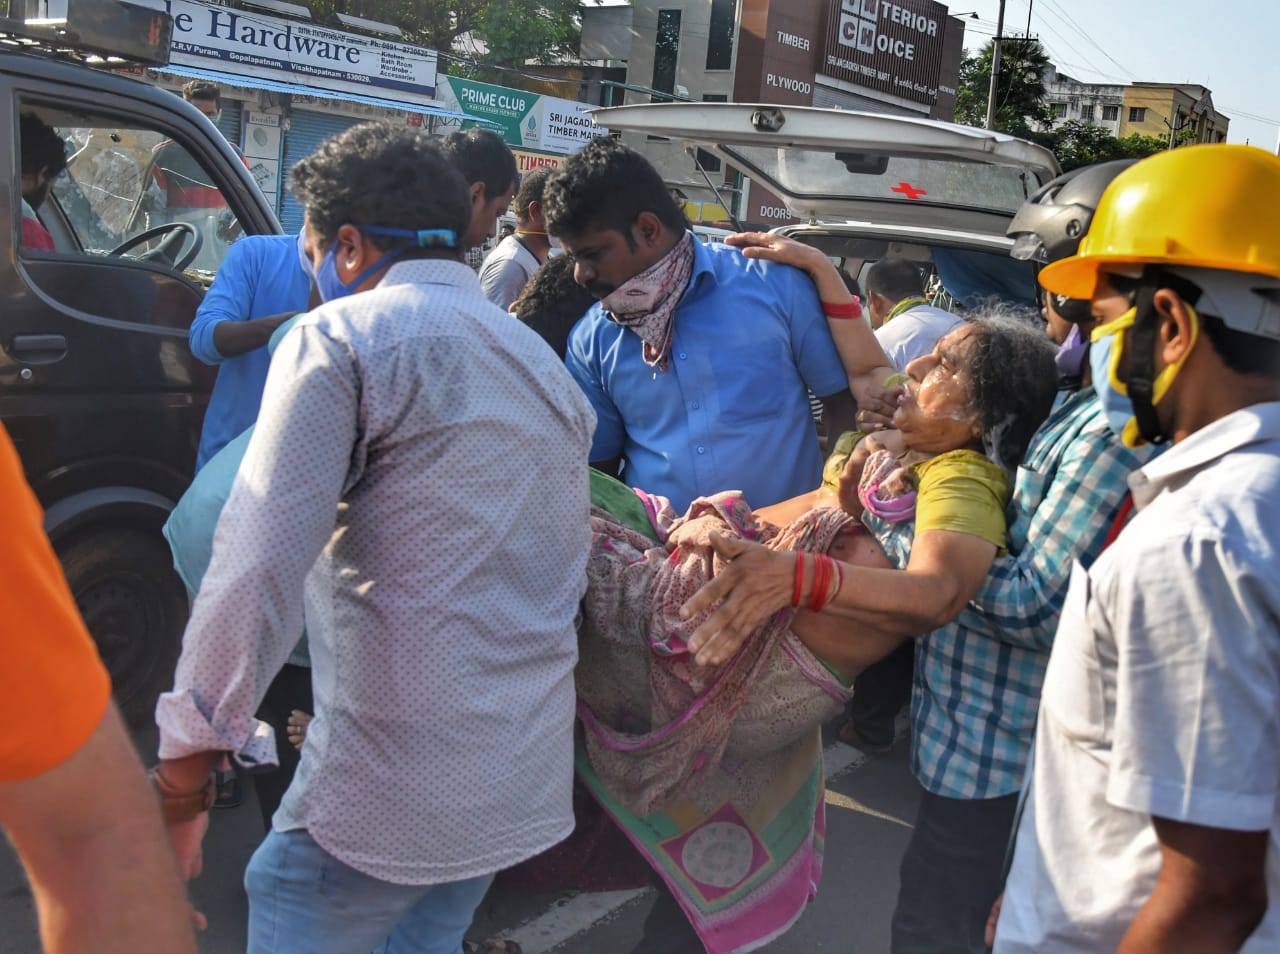 Andhra Pradesh Visakhapatnam Chemical Gas Leaked Today News in Hindi, 8 People Died, More Than 300 People Were Hospitalized, Today News, LG Polymers Gas Leakage